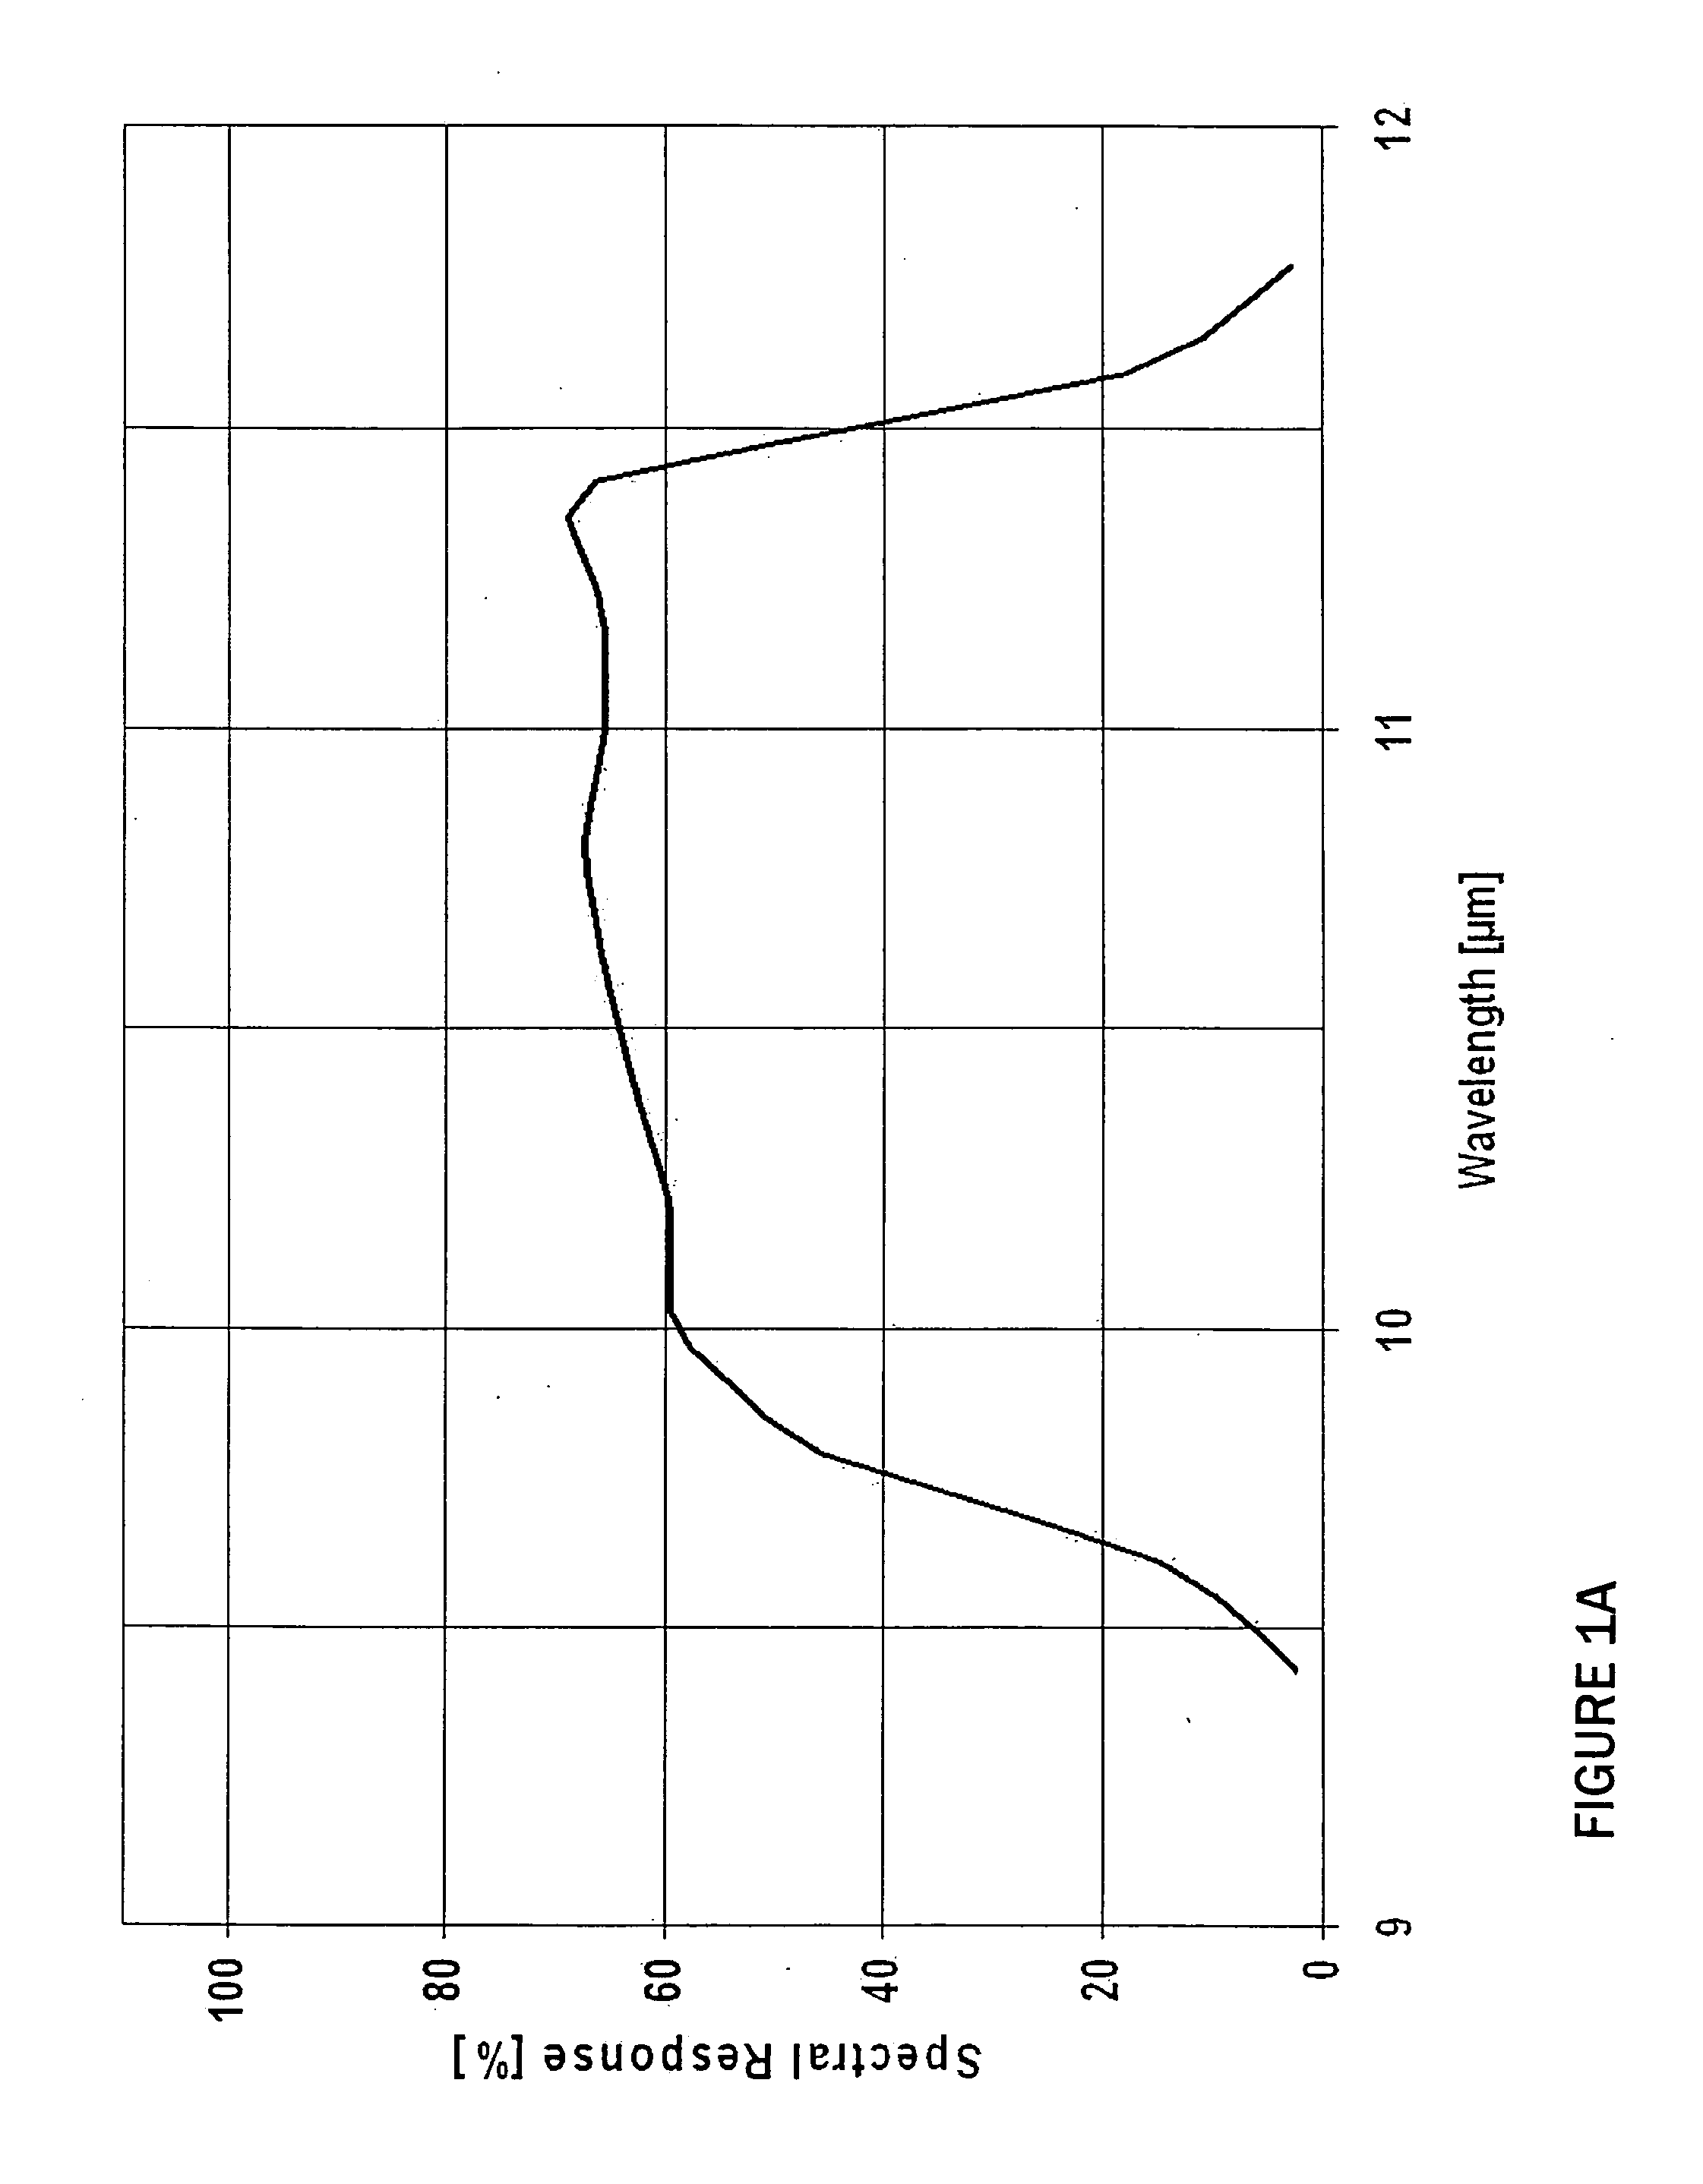 Correcting noncontact infrared thermometer data by removing contamination of the intervening atmosphere